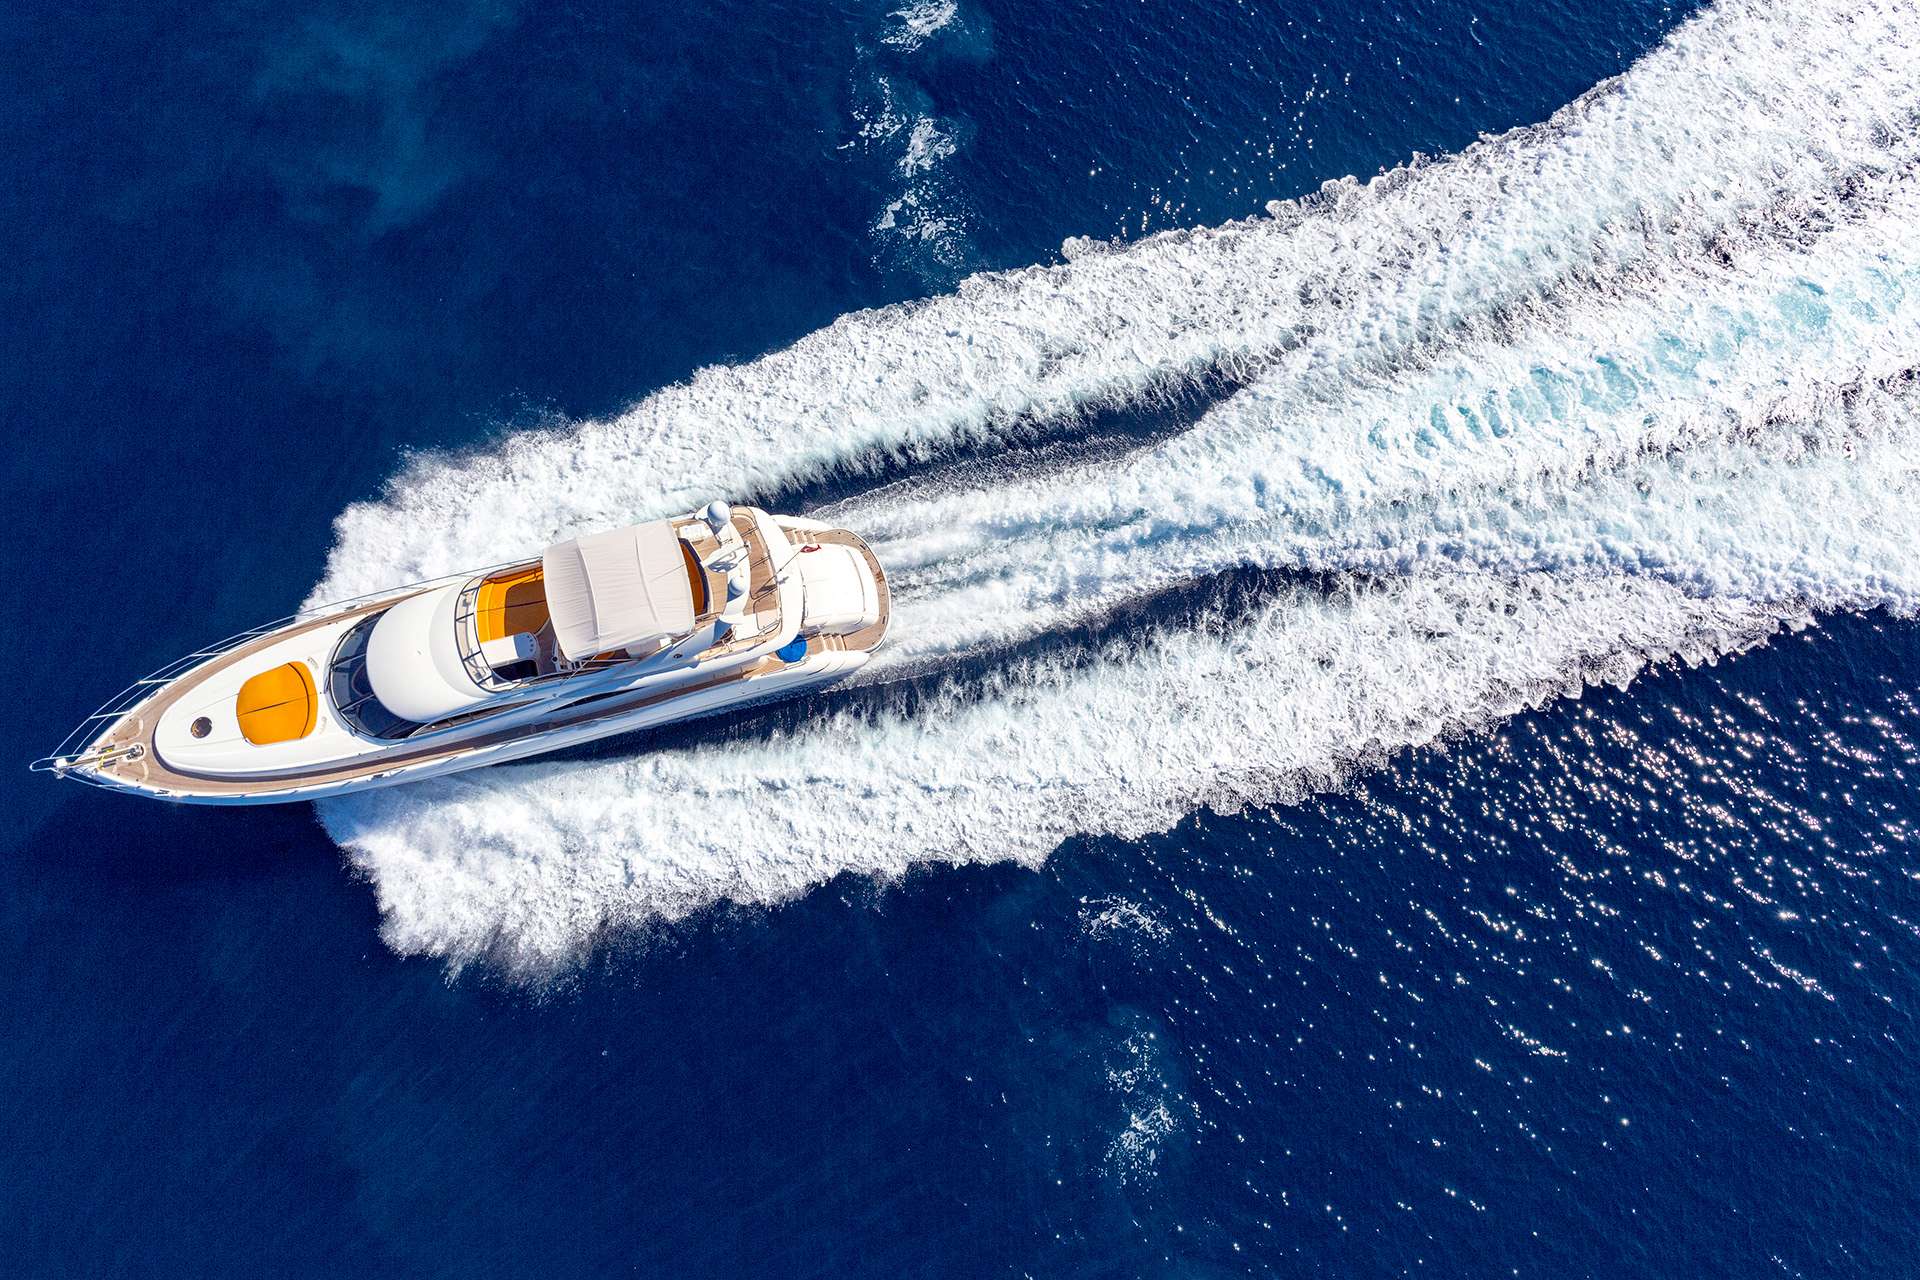 An image from above of a luxury power yacht